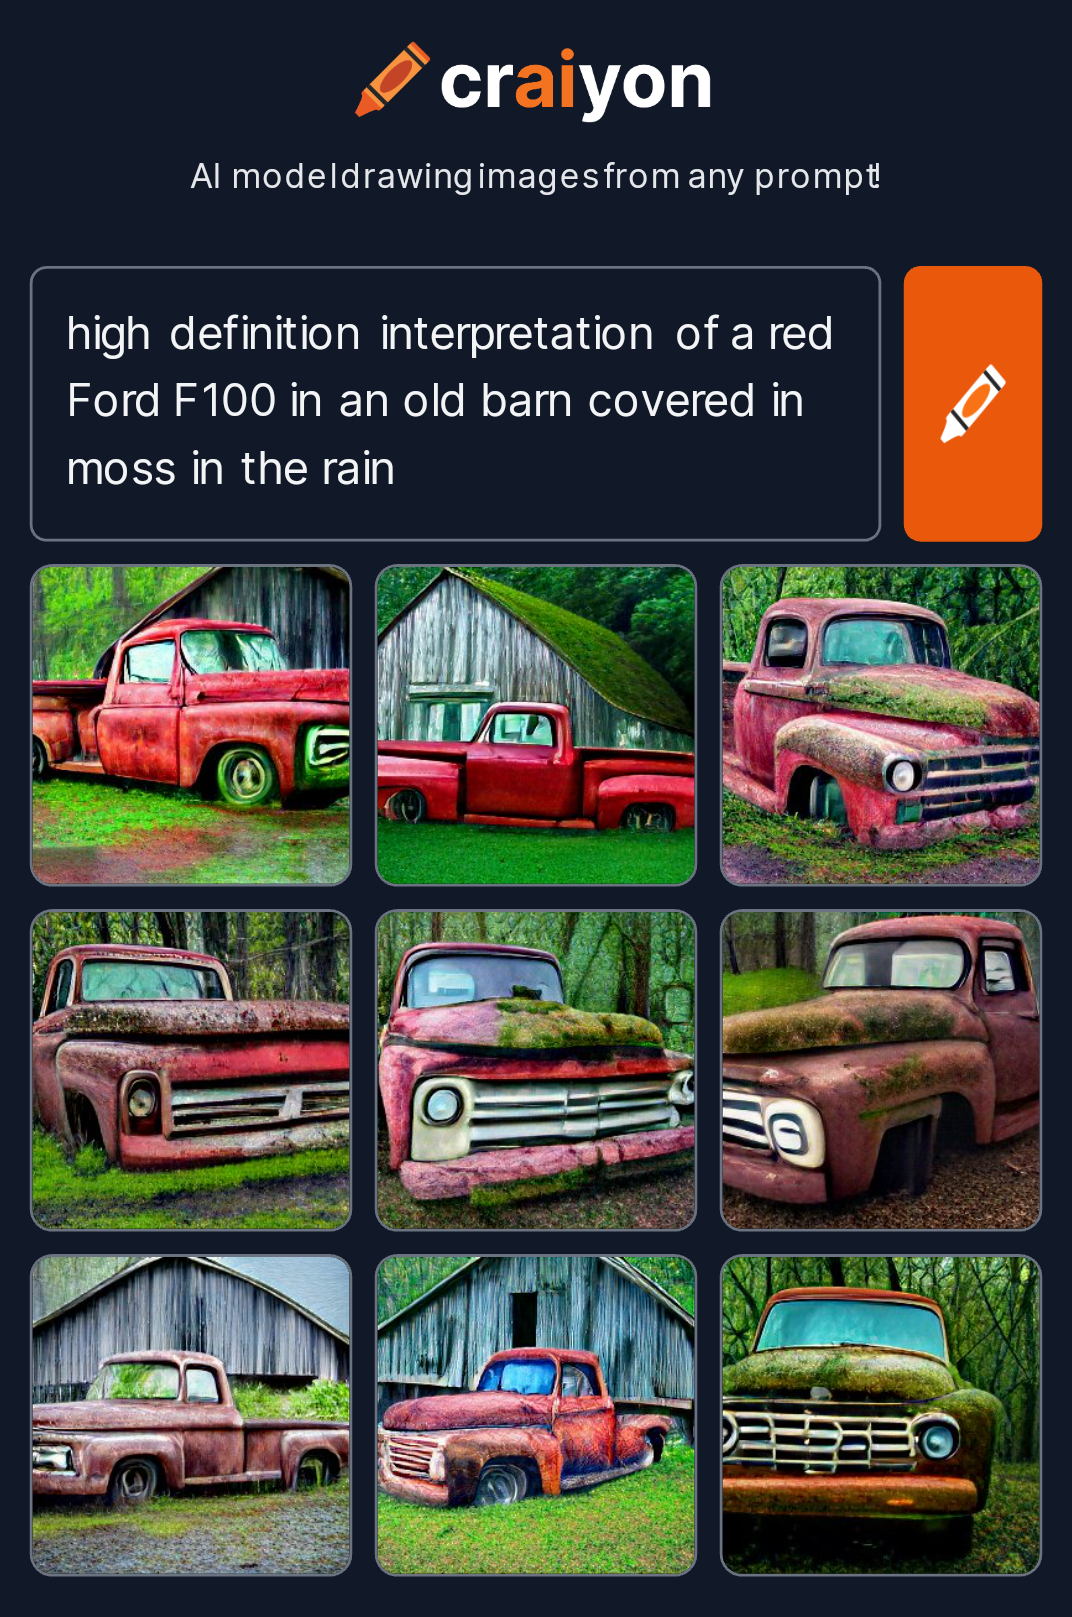 craiyon_212303_high_definition_interpretation_of_a_red_Ford_F100_in_an_old_barn_covered_in_moss_in_t.png